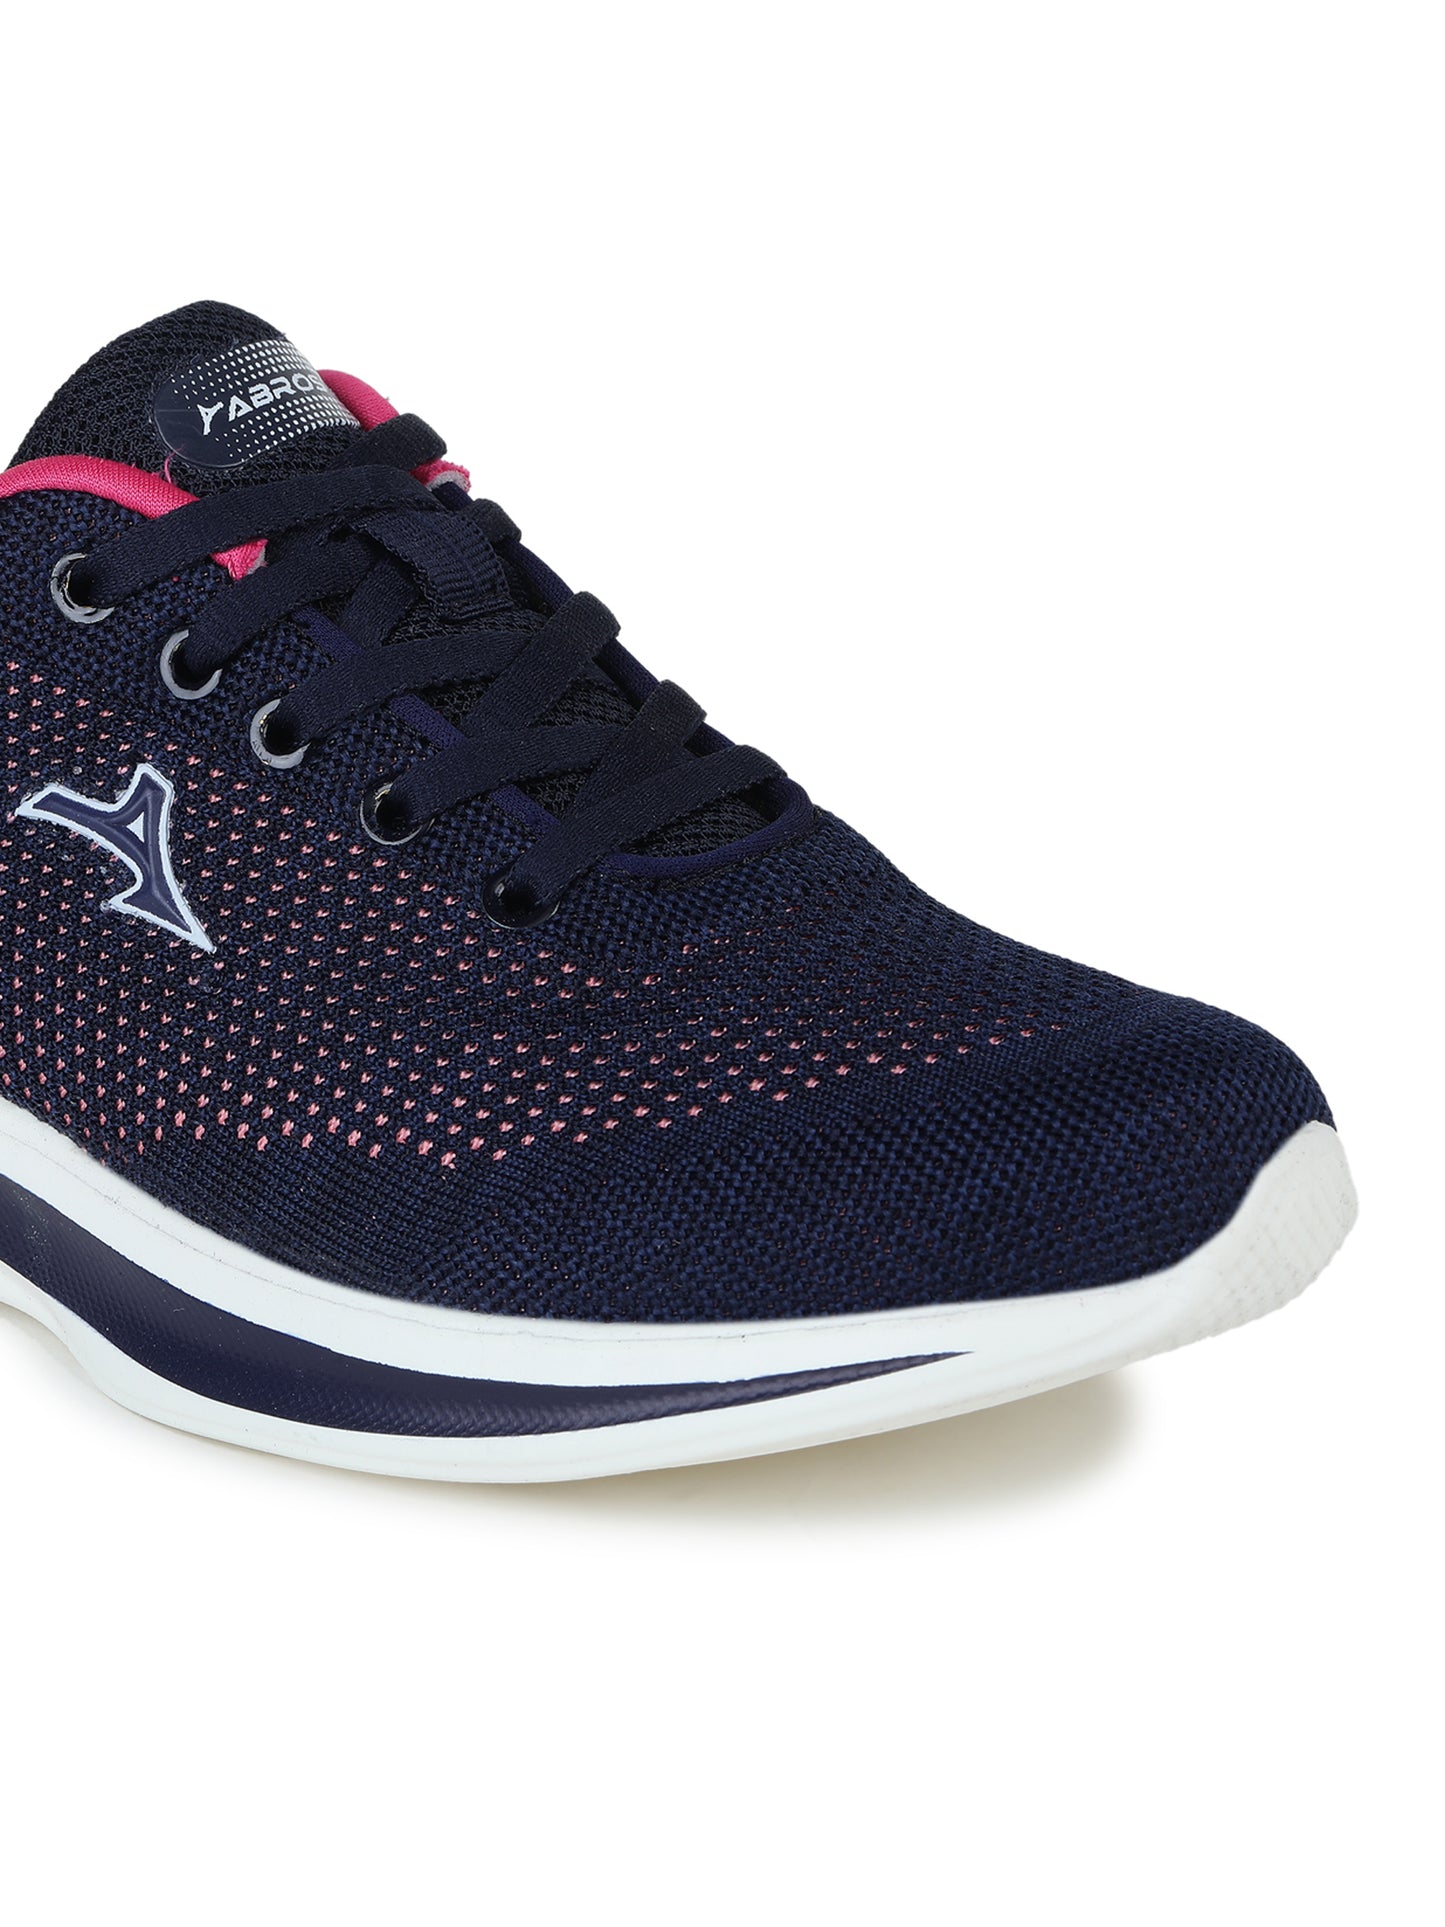 ABROS SOFIA-L SPORTS SHOES FOR WOMEN